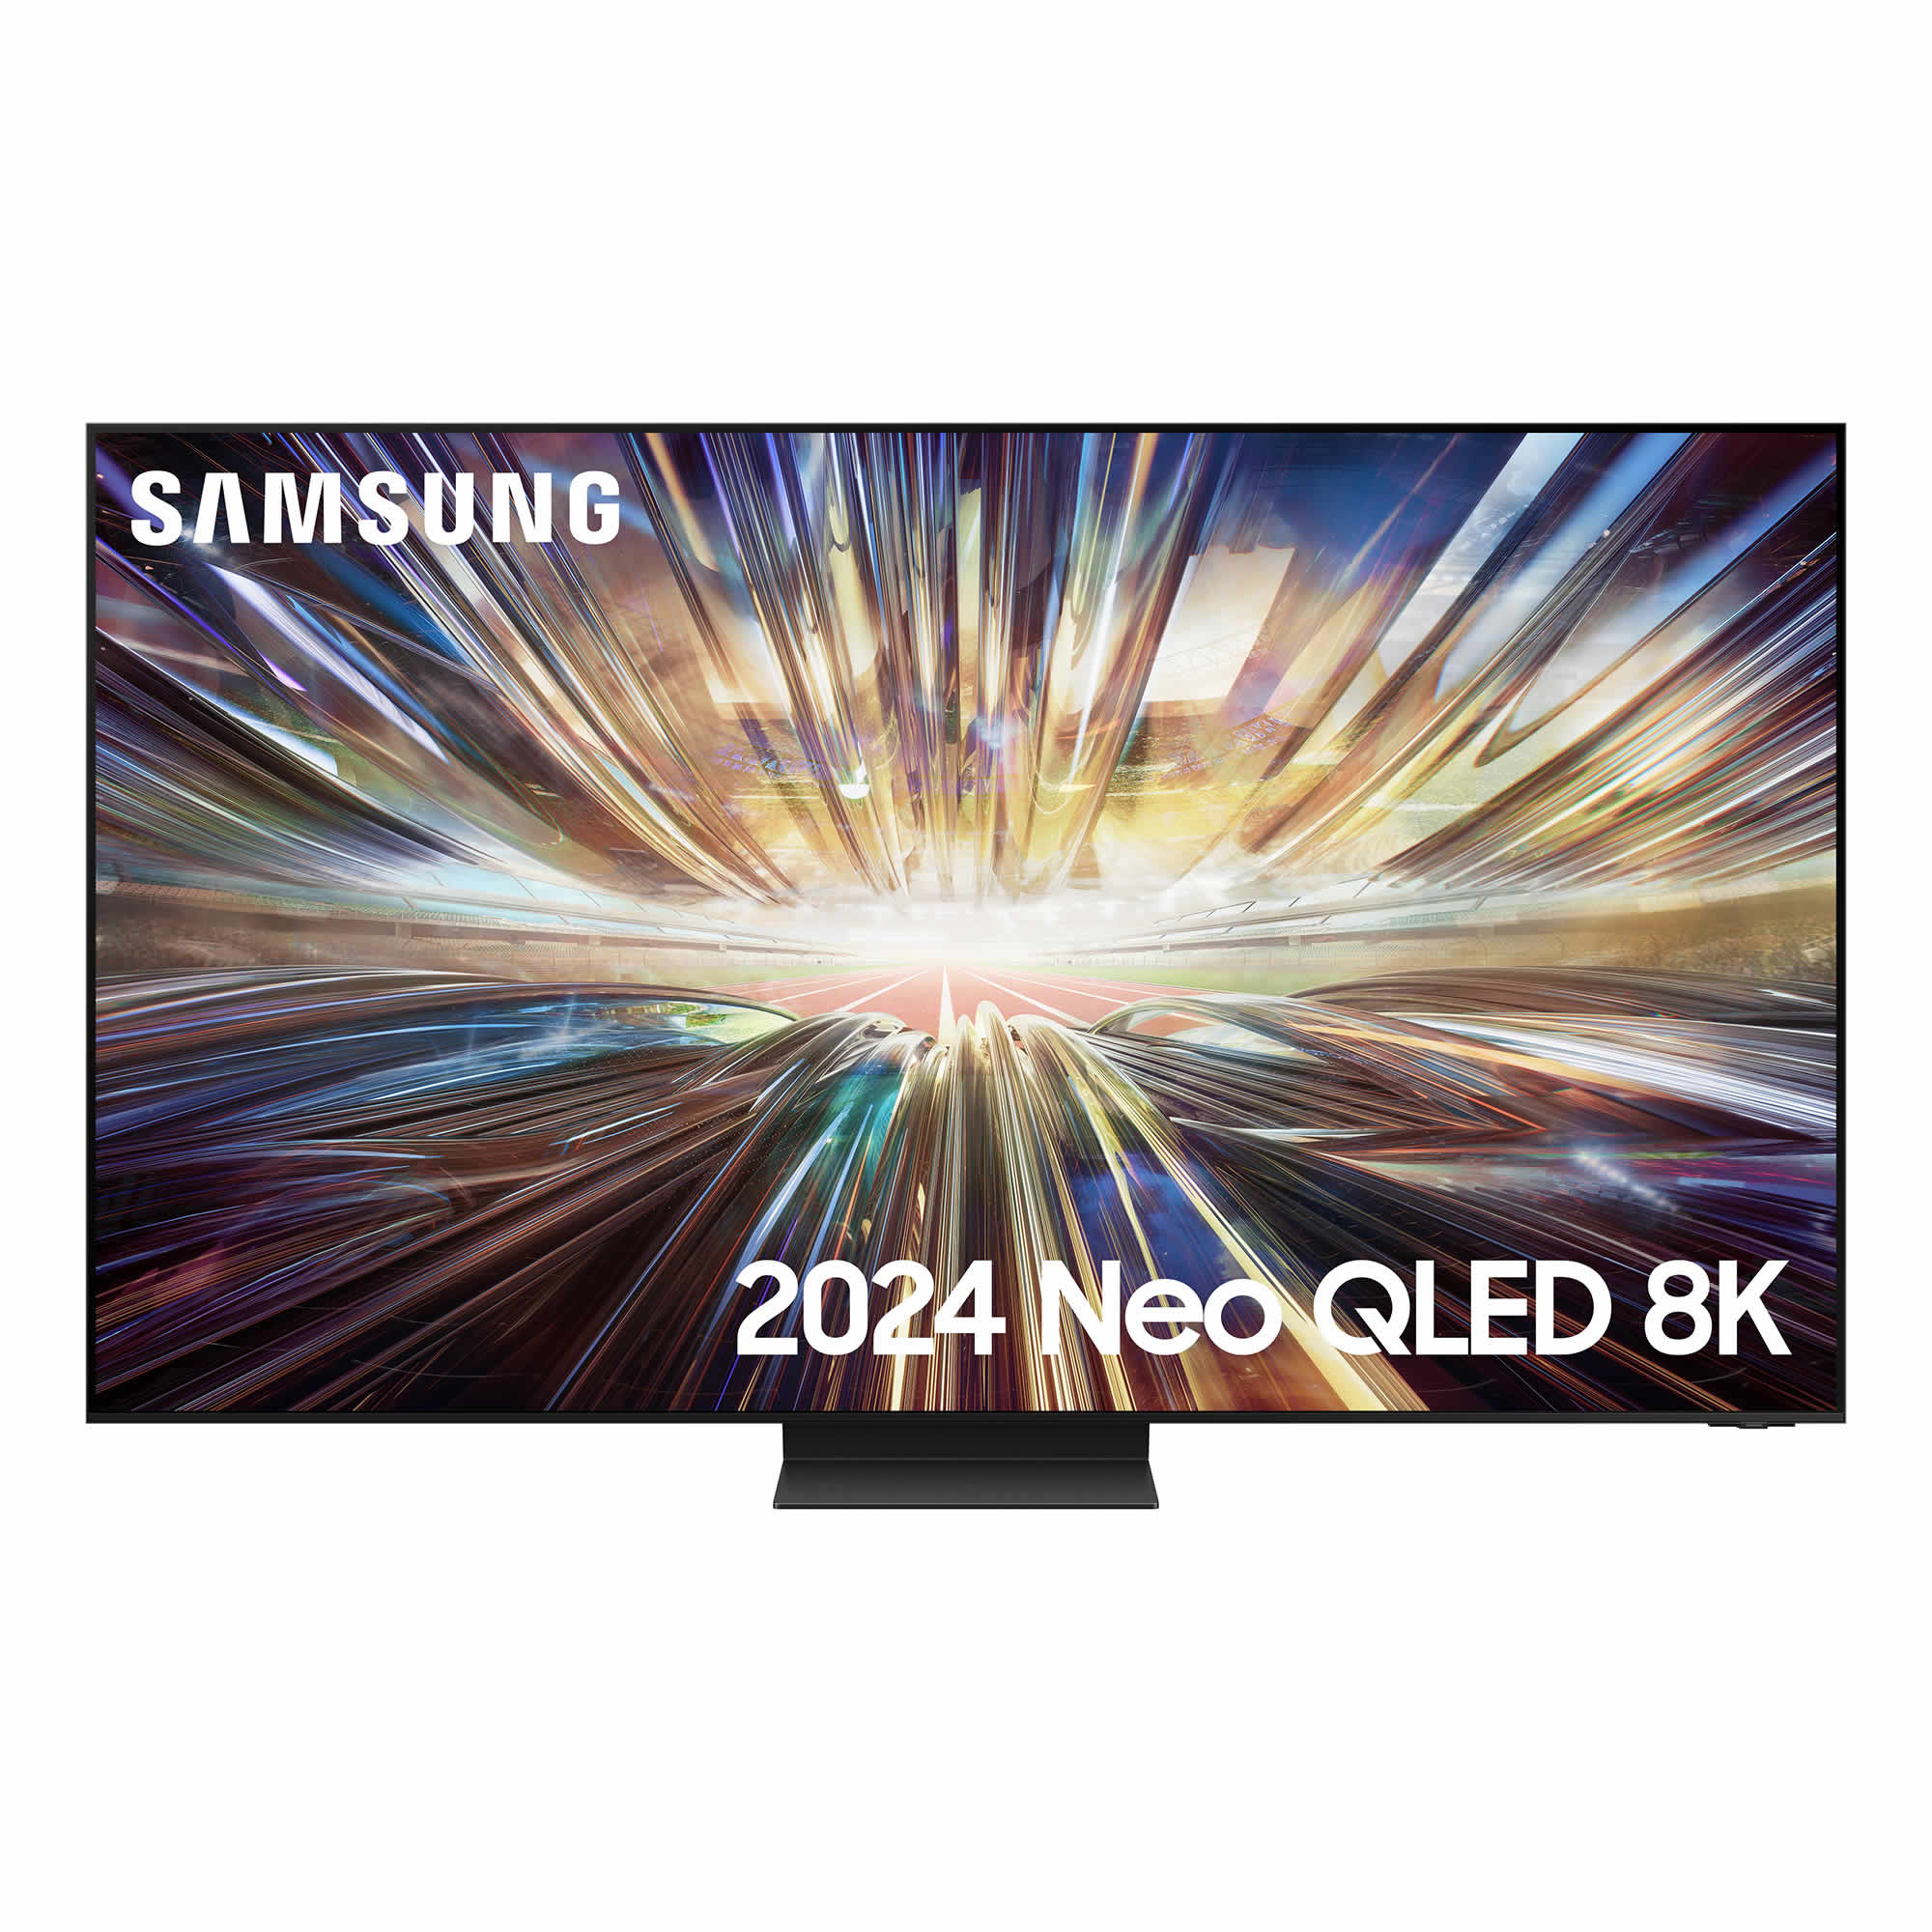 Samsung 85inch Neo QLED UHD 8K One Connect Box SMART TV WiFi